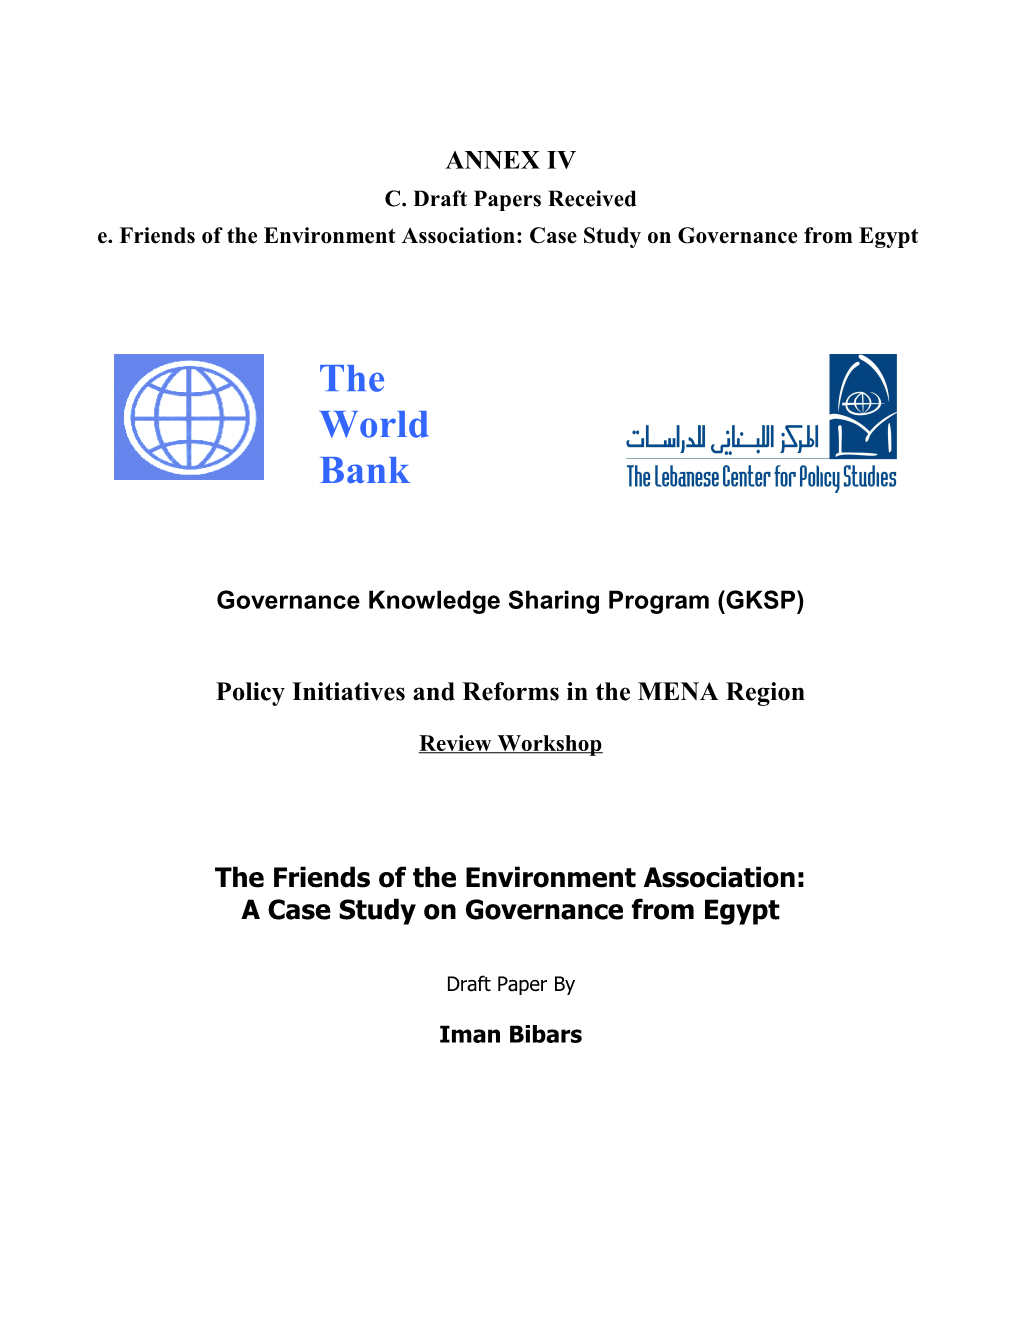 E. Friends of the Environment Association:Case Study on Governance from Egypt